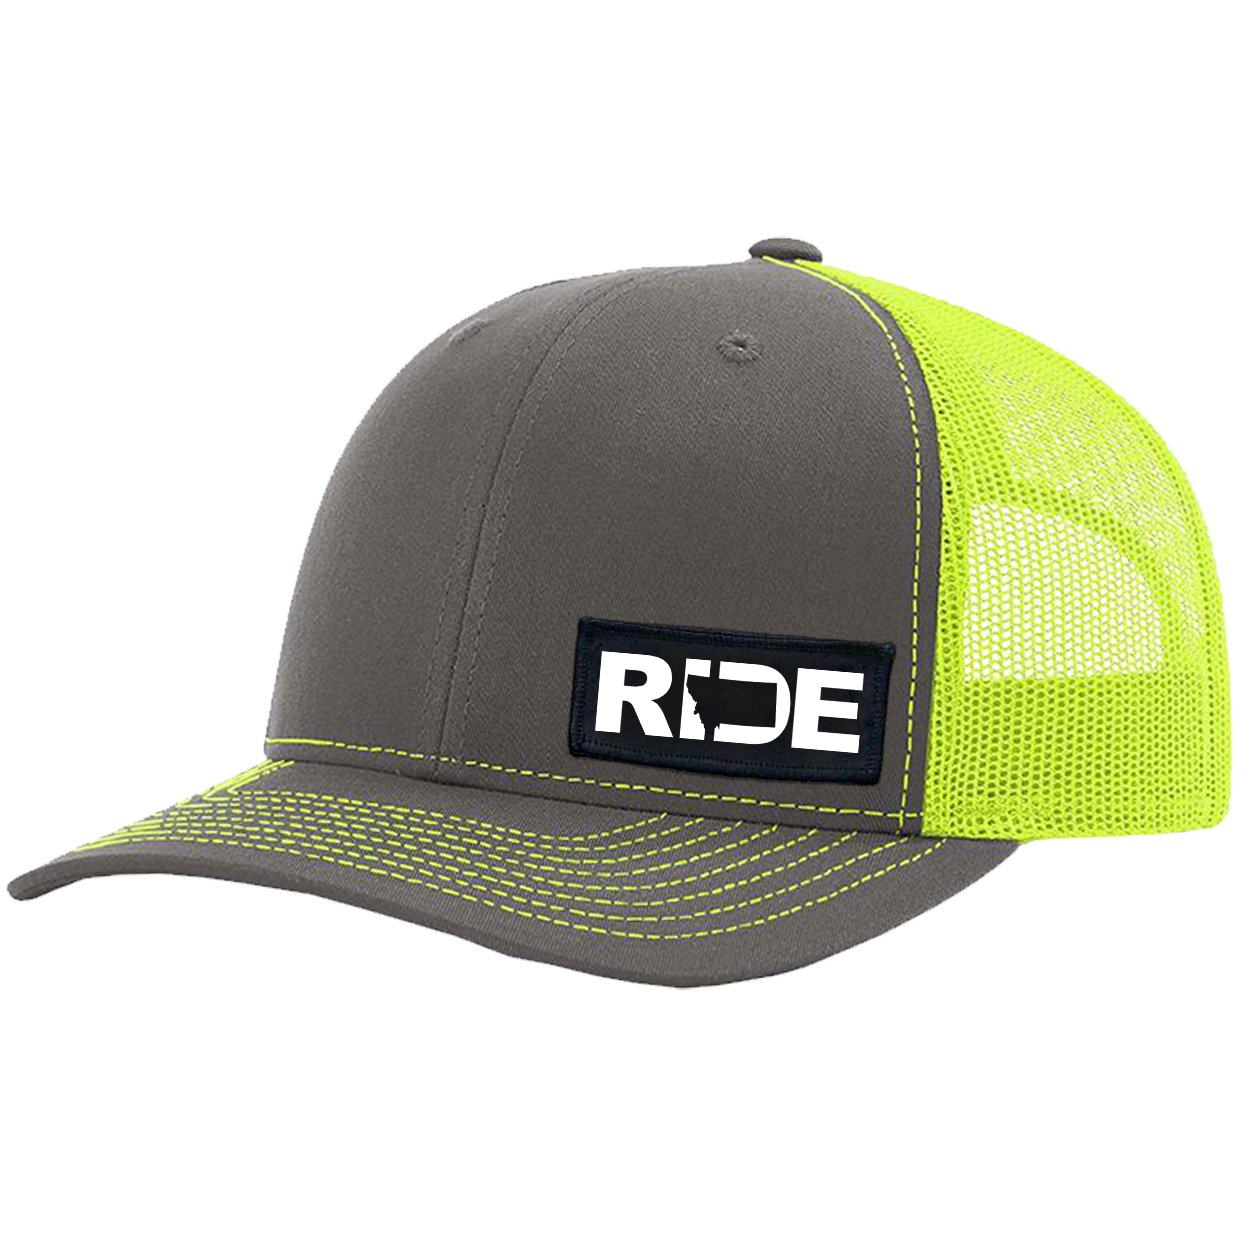 Ride Montana Night Out Woven Patch Snapback Trucker Hat Charcoal/Neon Yellow (White Logo)